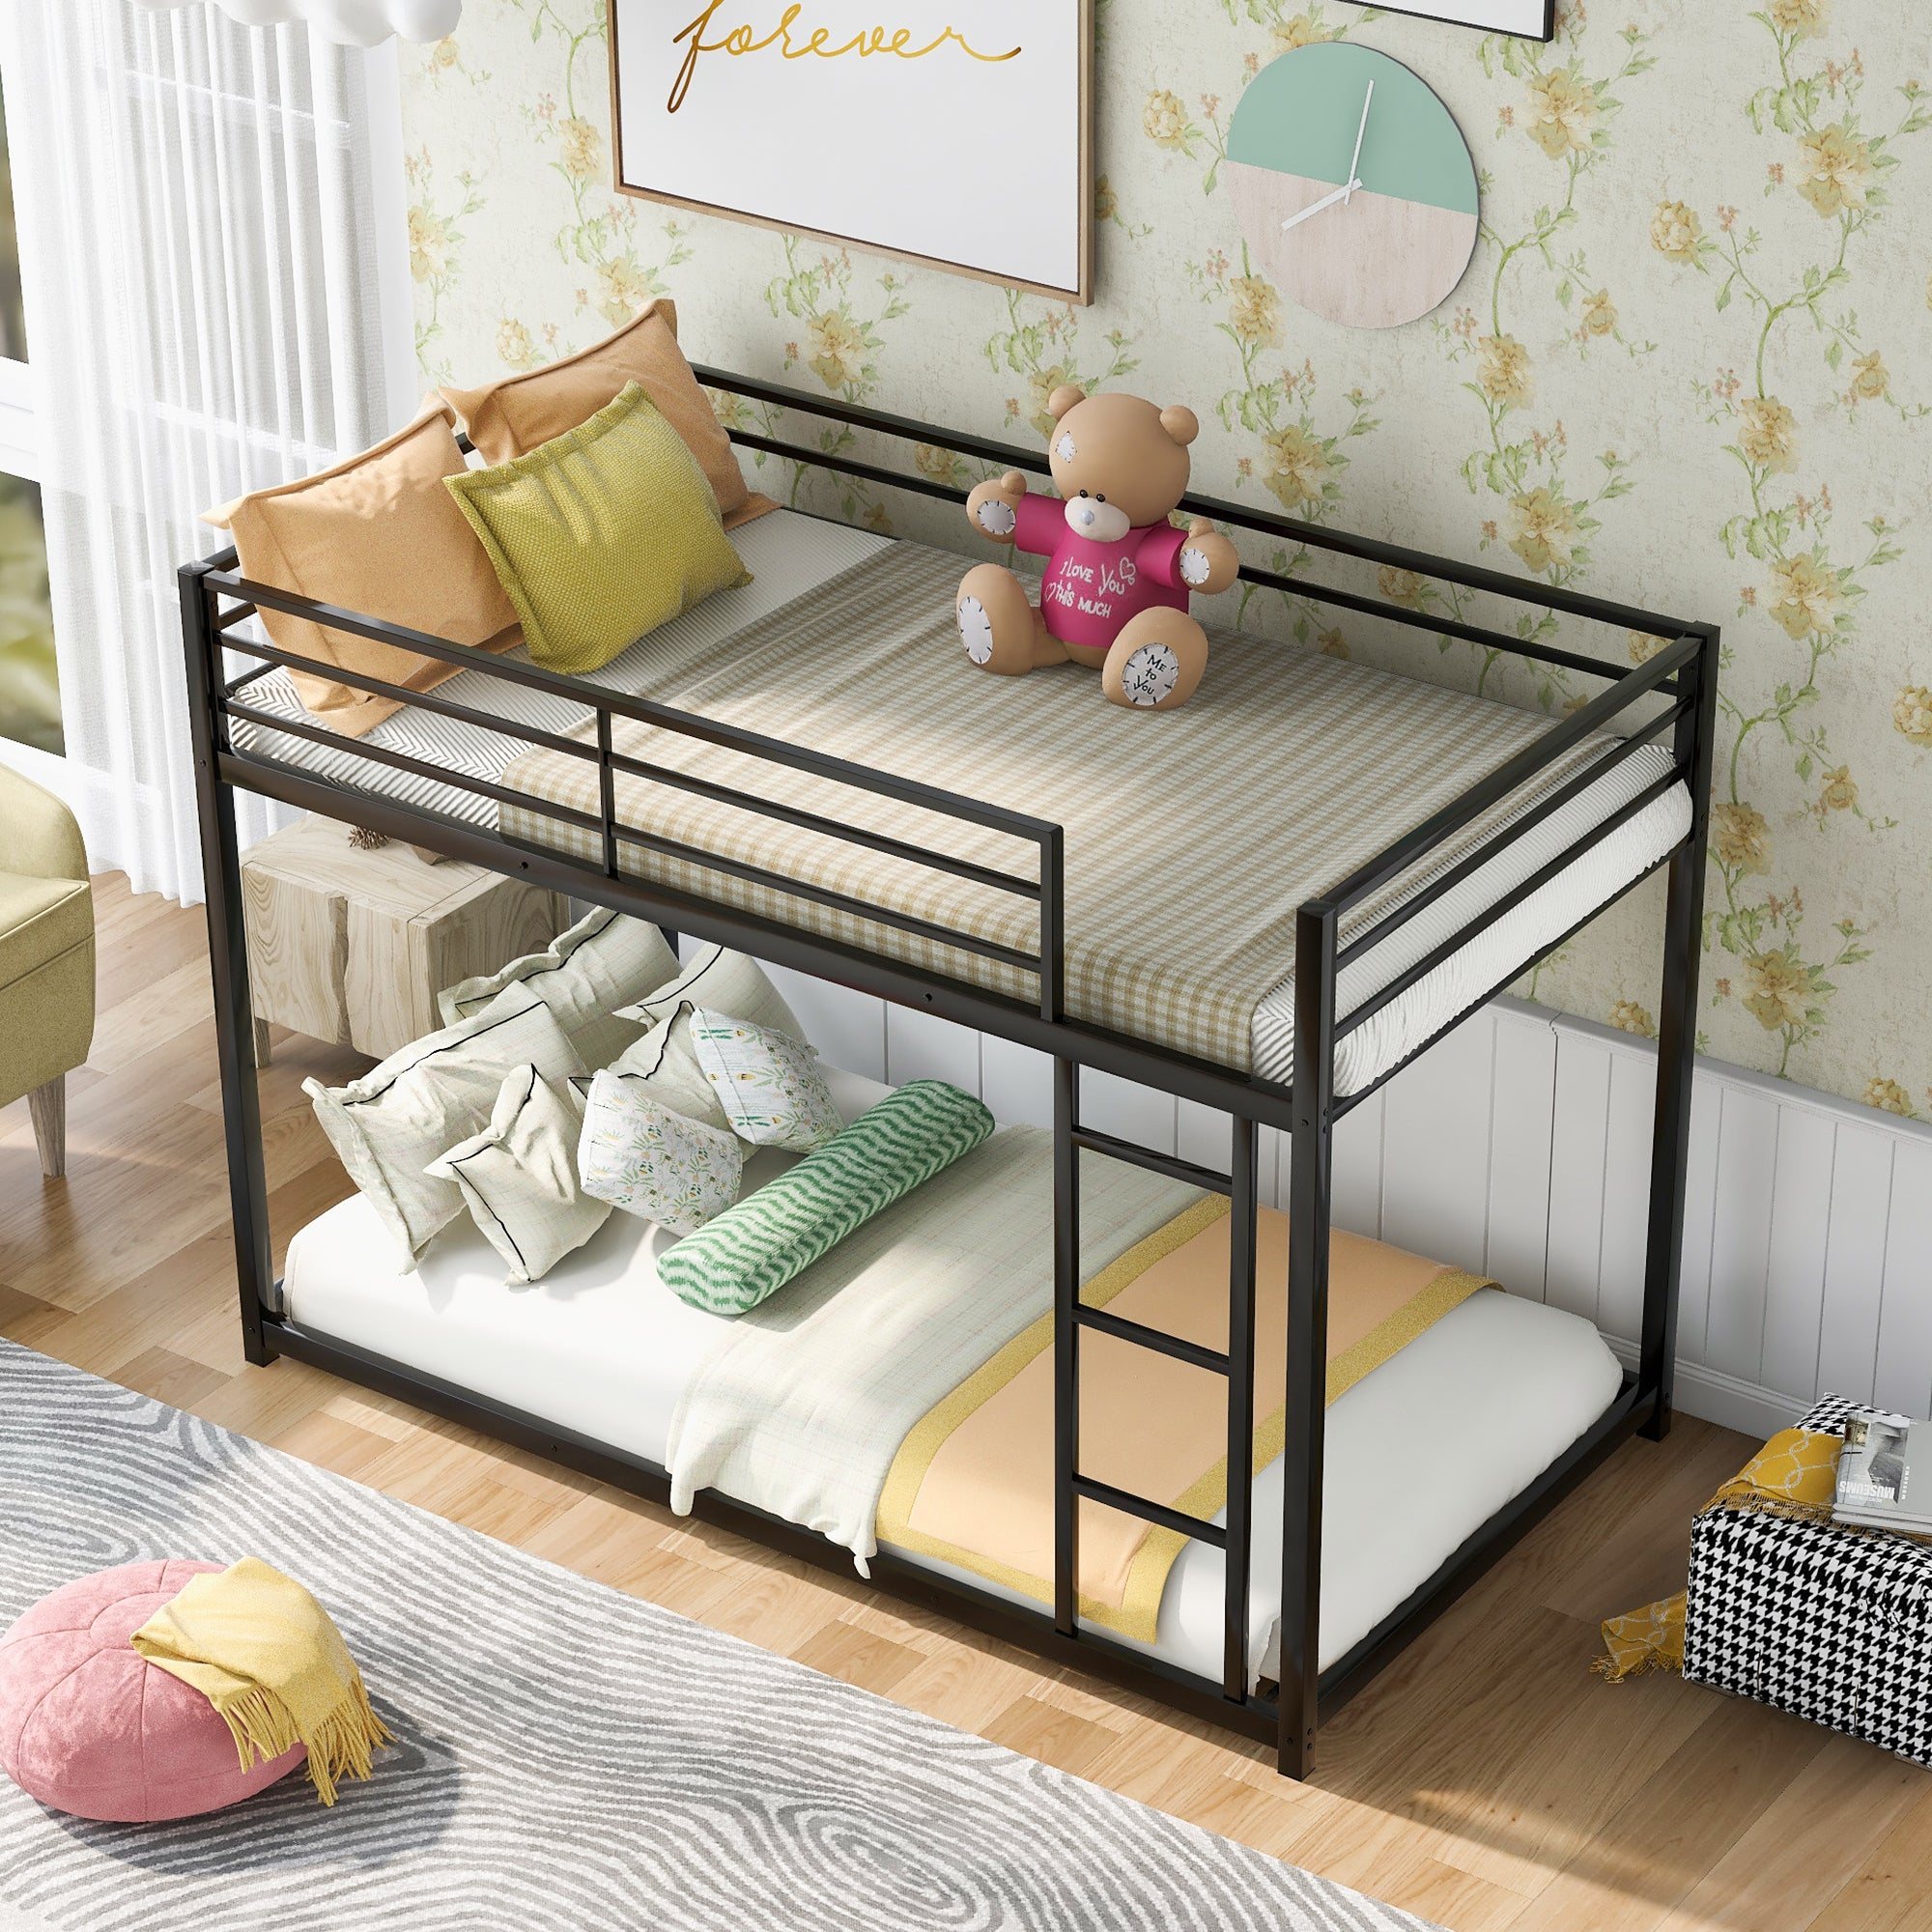 Twin over Twin Metal Bunk Bed, Low Bunk Bed with black-steel